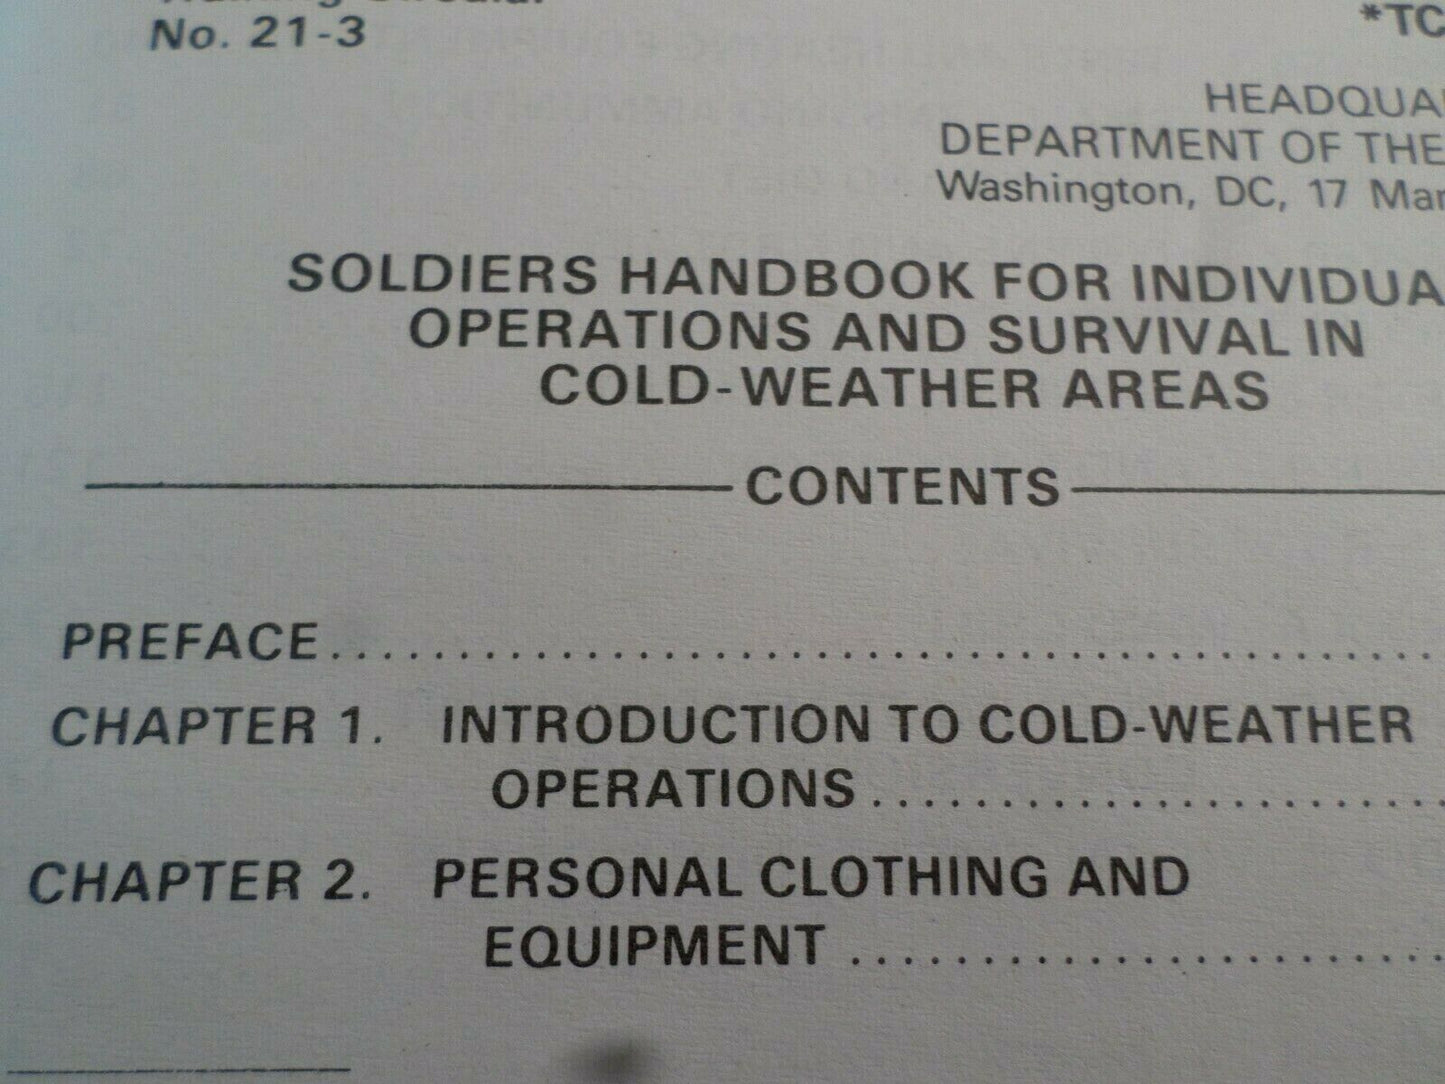 U.S ARMY SOLDIER'S HANDBOOK SURVIVAL GUIDE IN COLD WEATHER AREAS TC 21-3